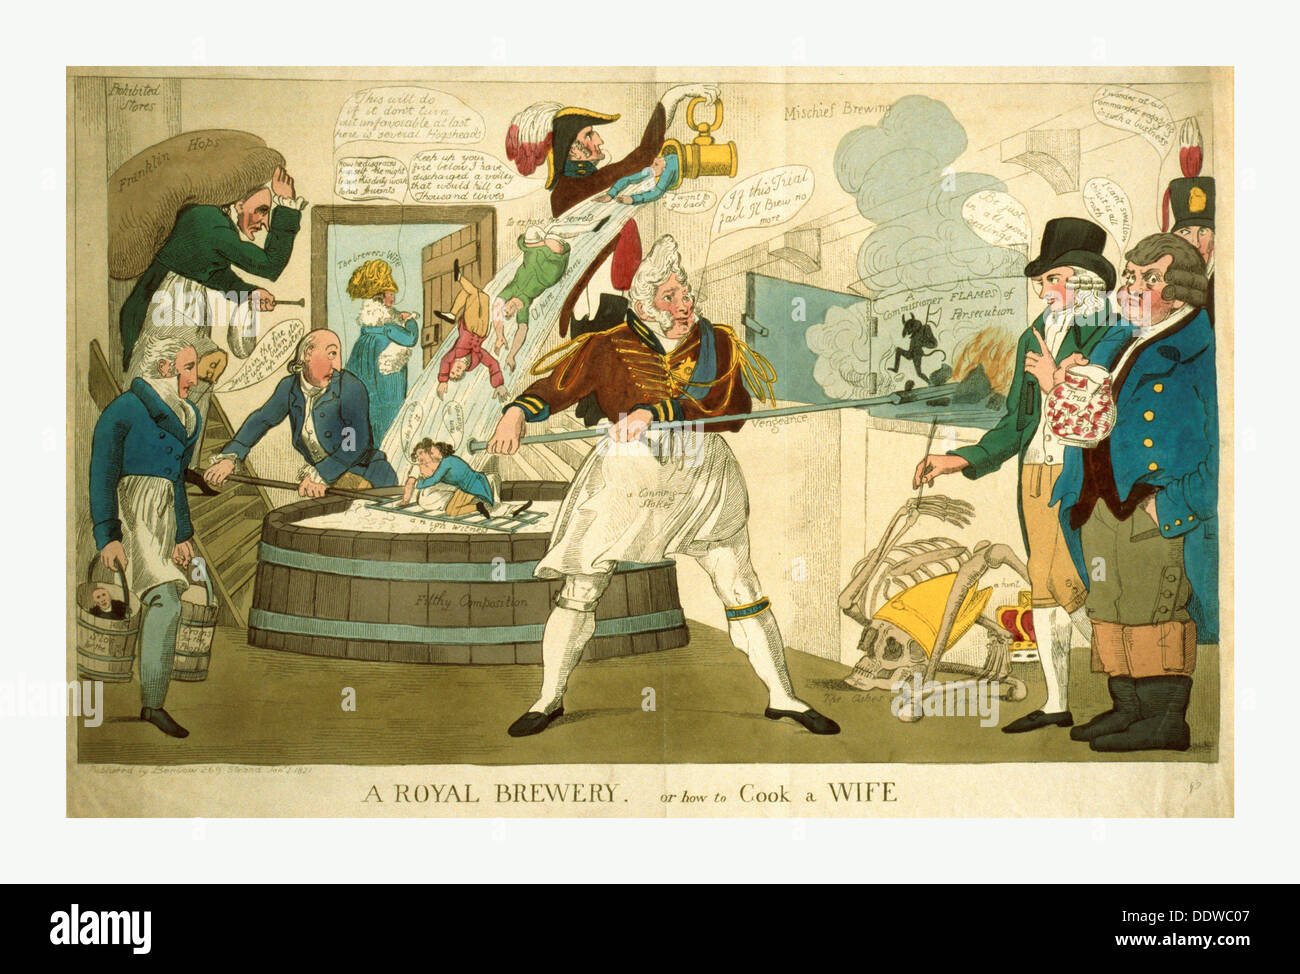 A royal brewery, or how to cook a wife, engraving 1821, George IV, a conning stoker, of some Mischief brewing Stock Photo